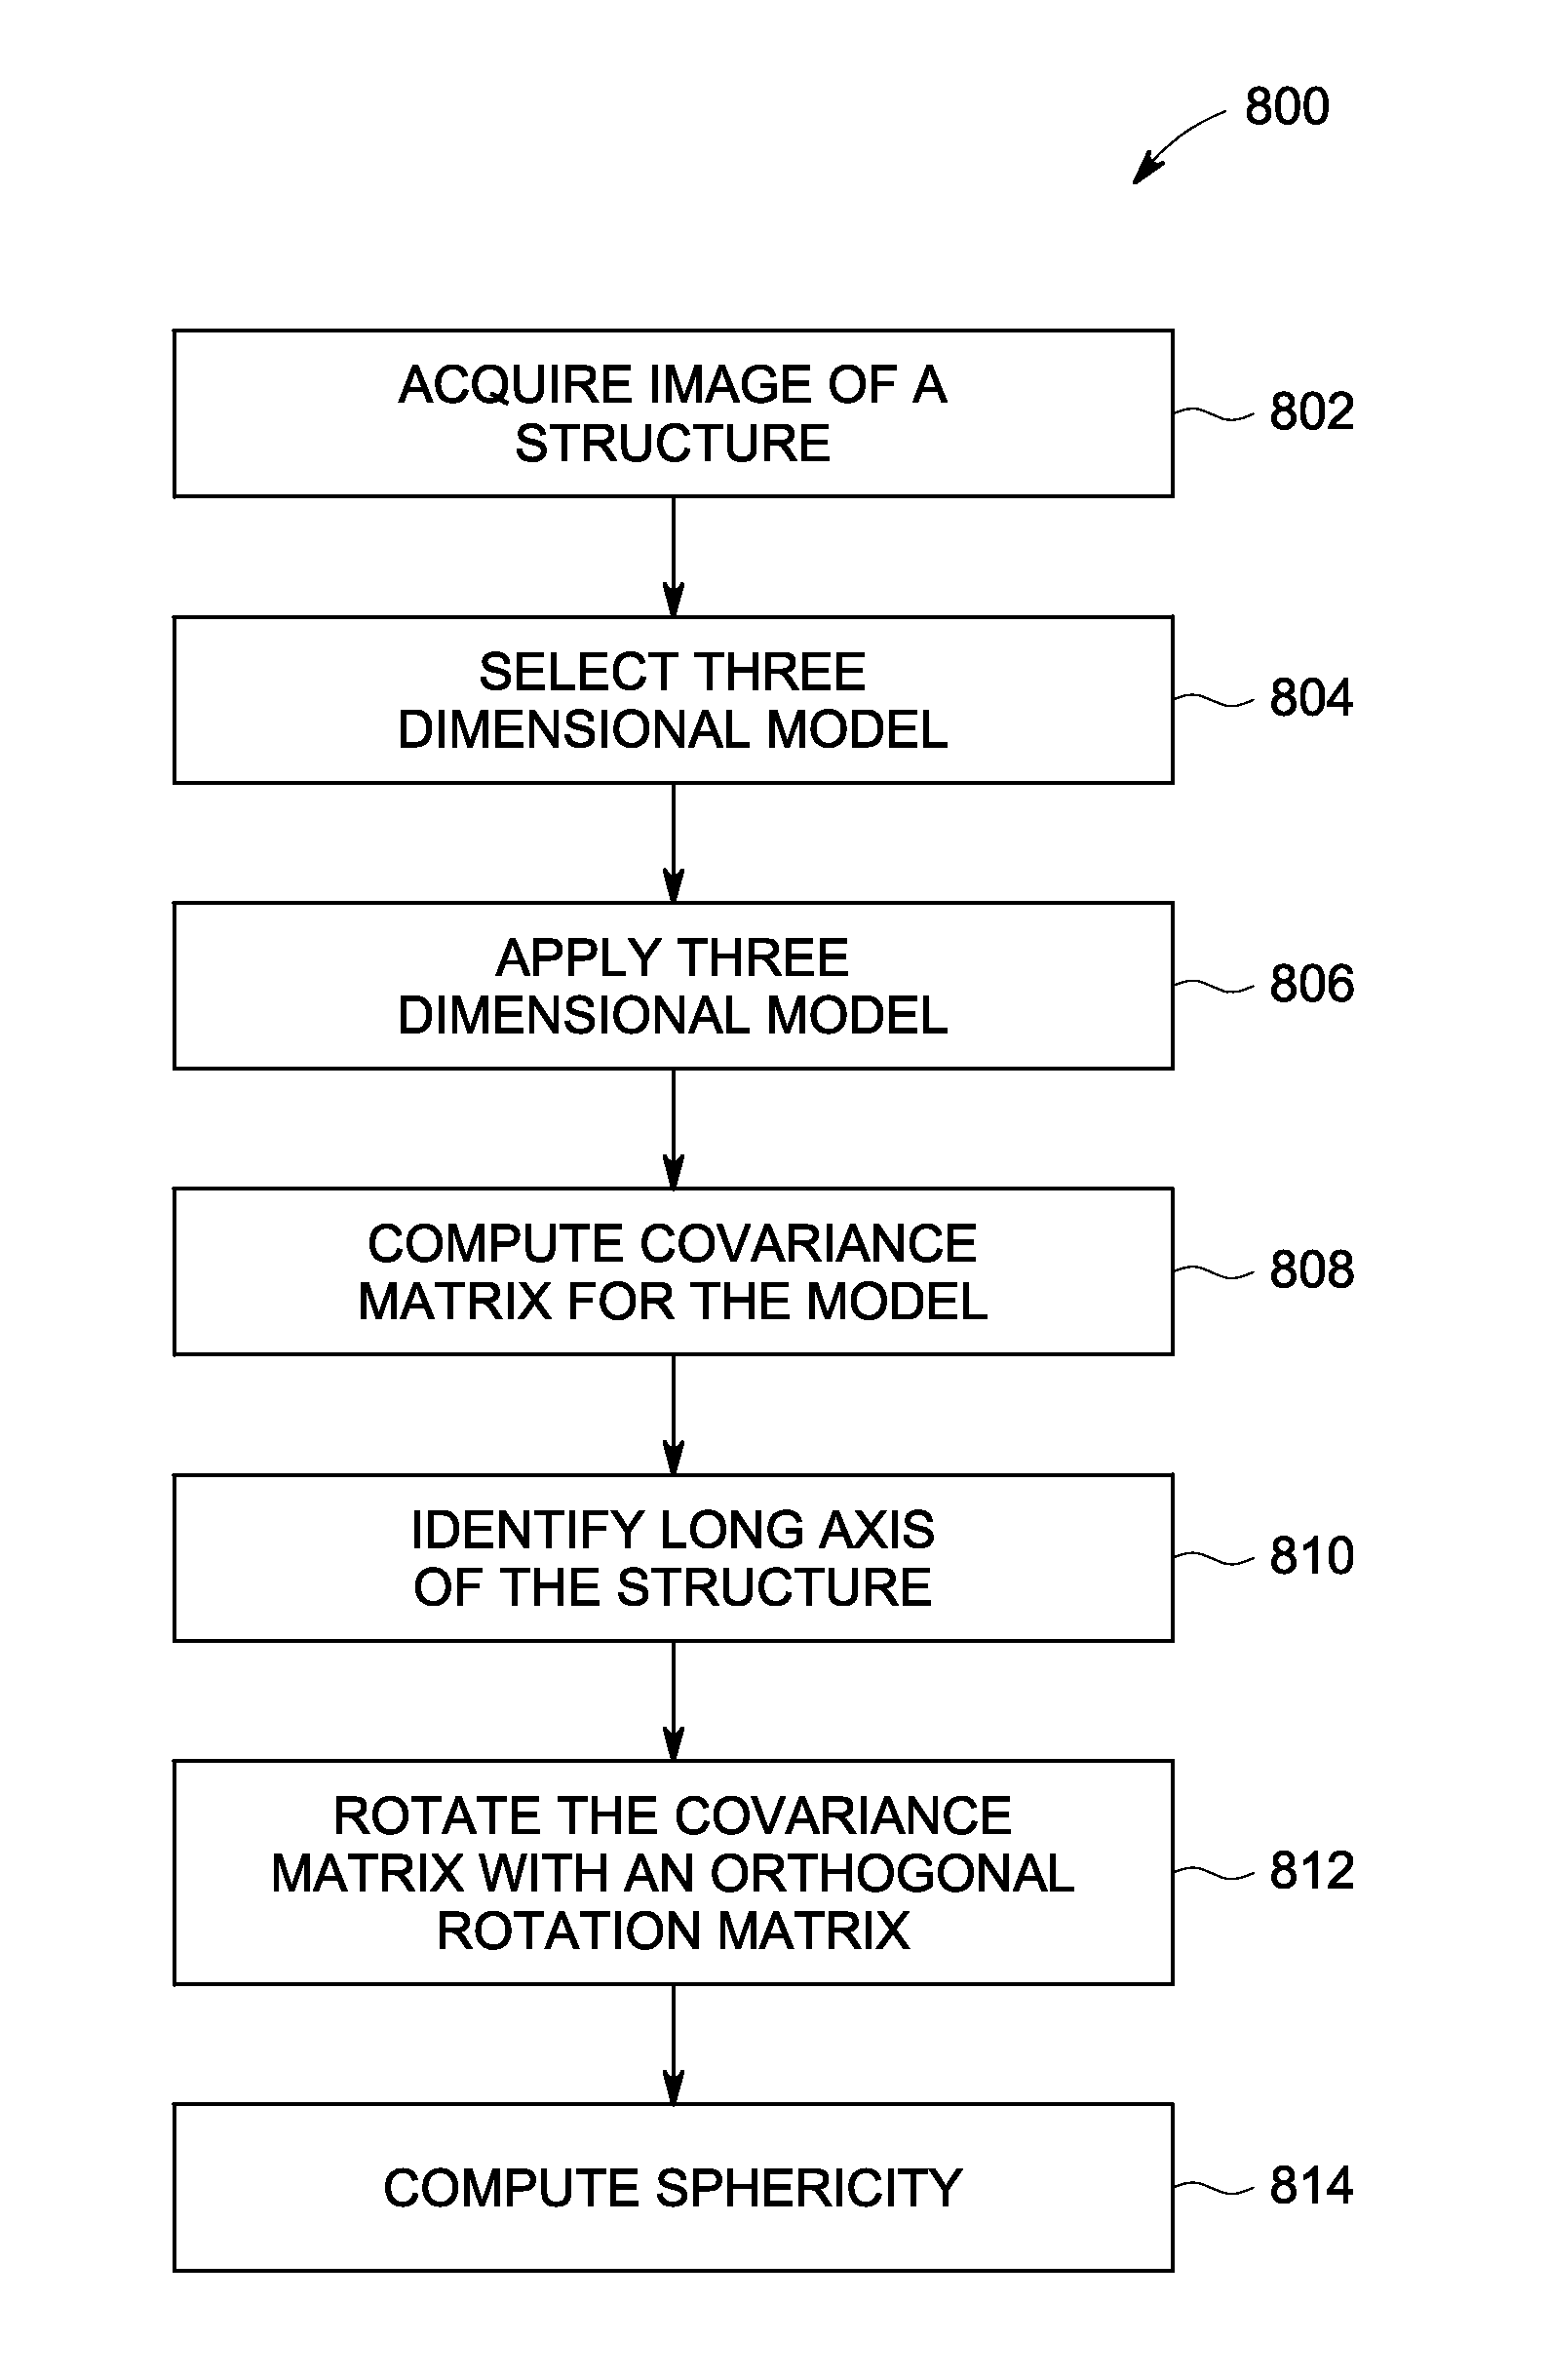 Method for Calculating The Sphericity of a Structure